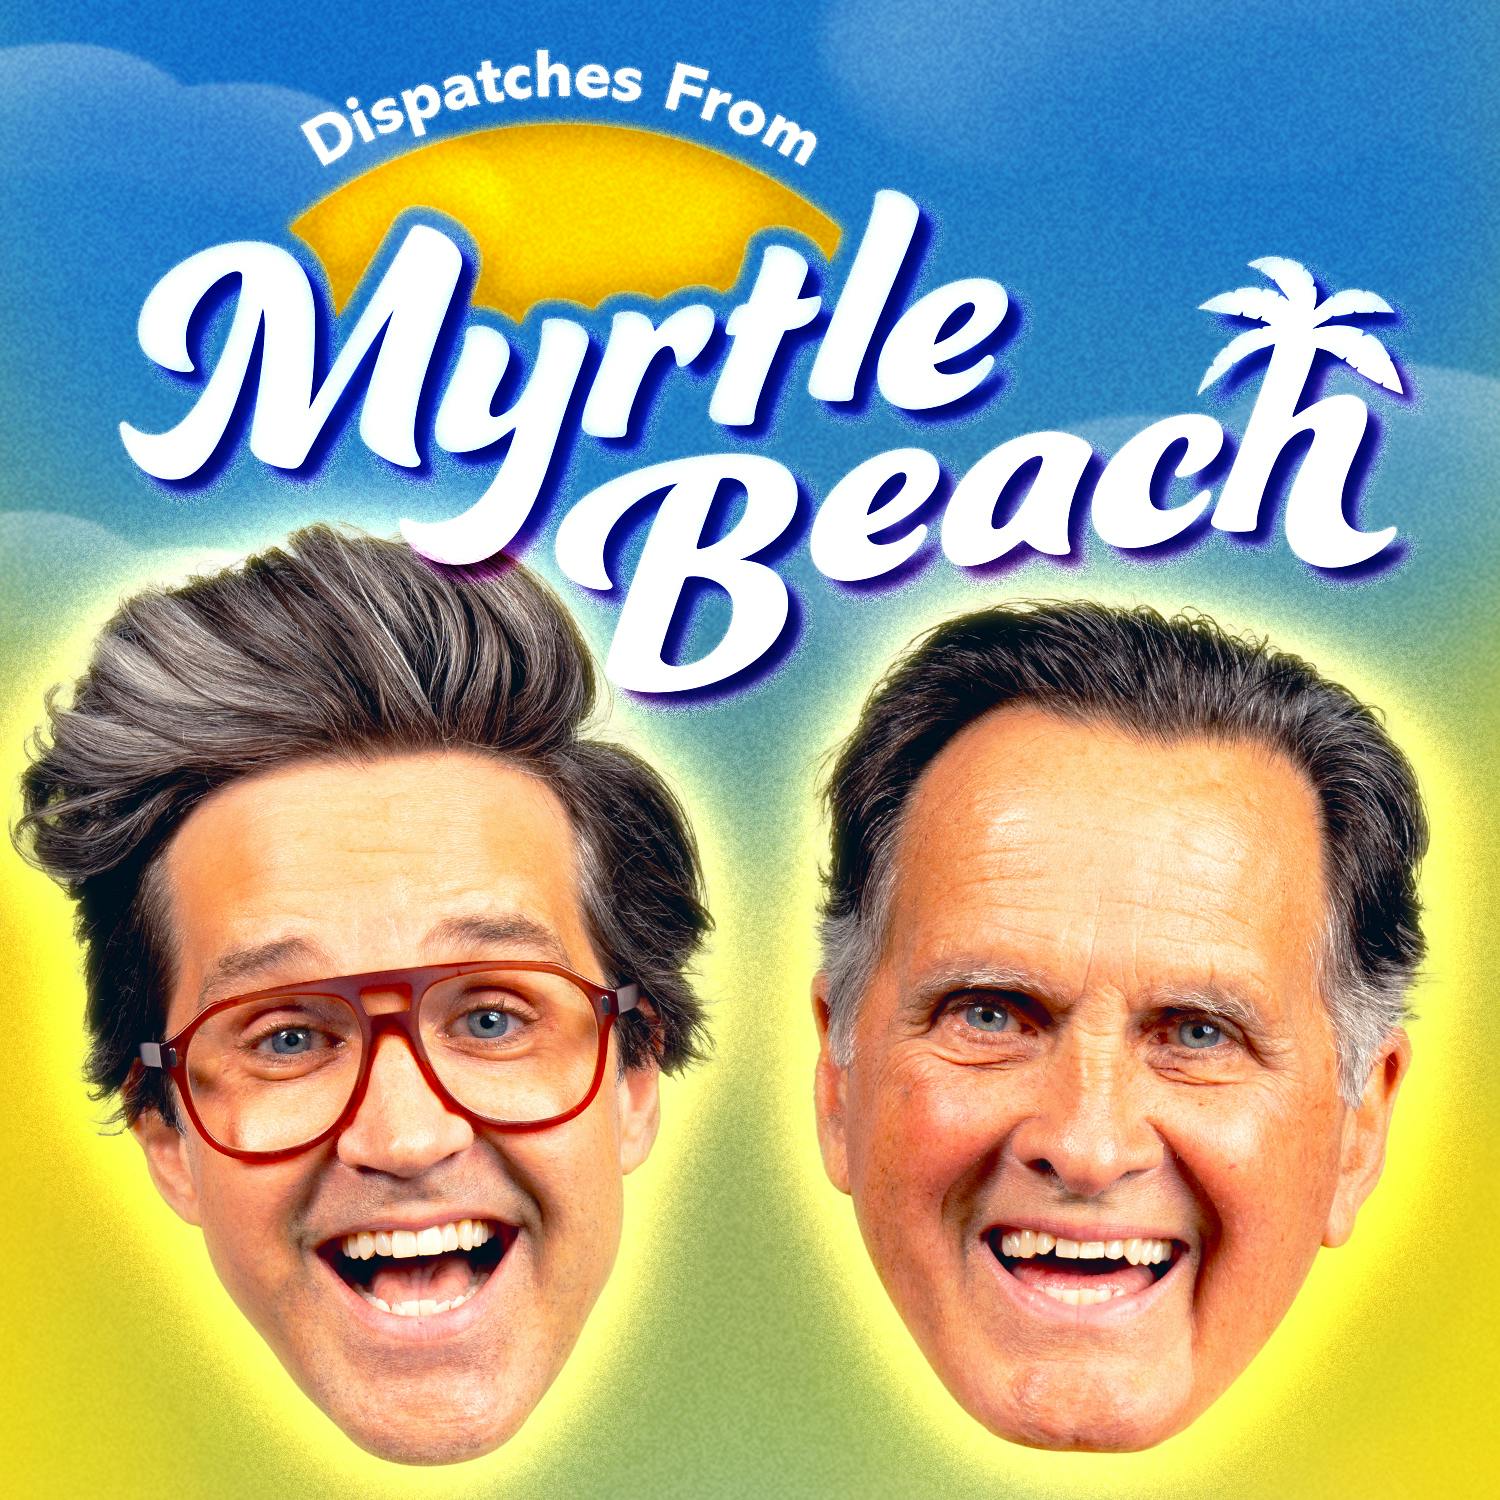 Dispatches From Myrtle Beach podcast show image